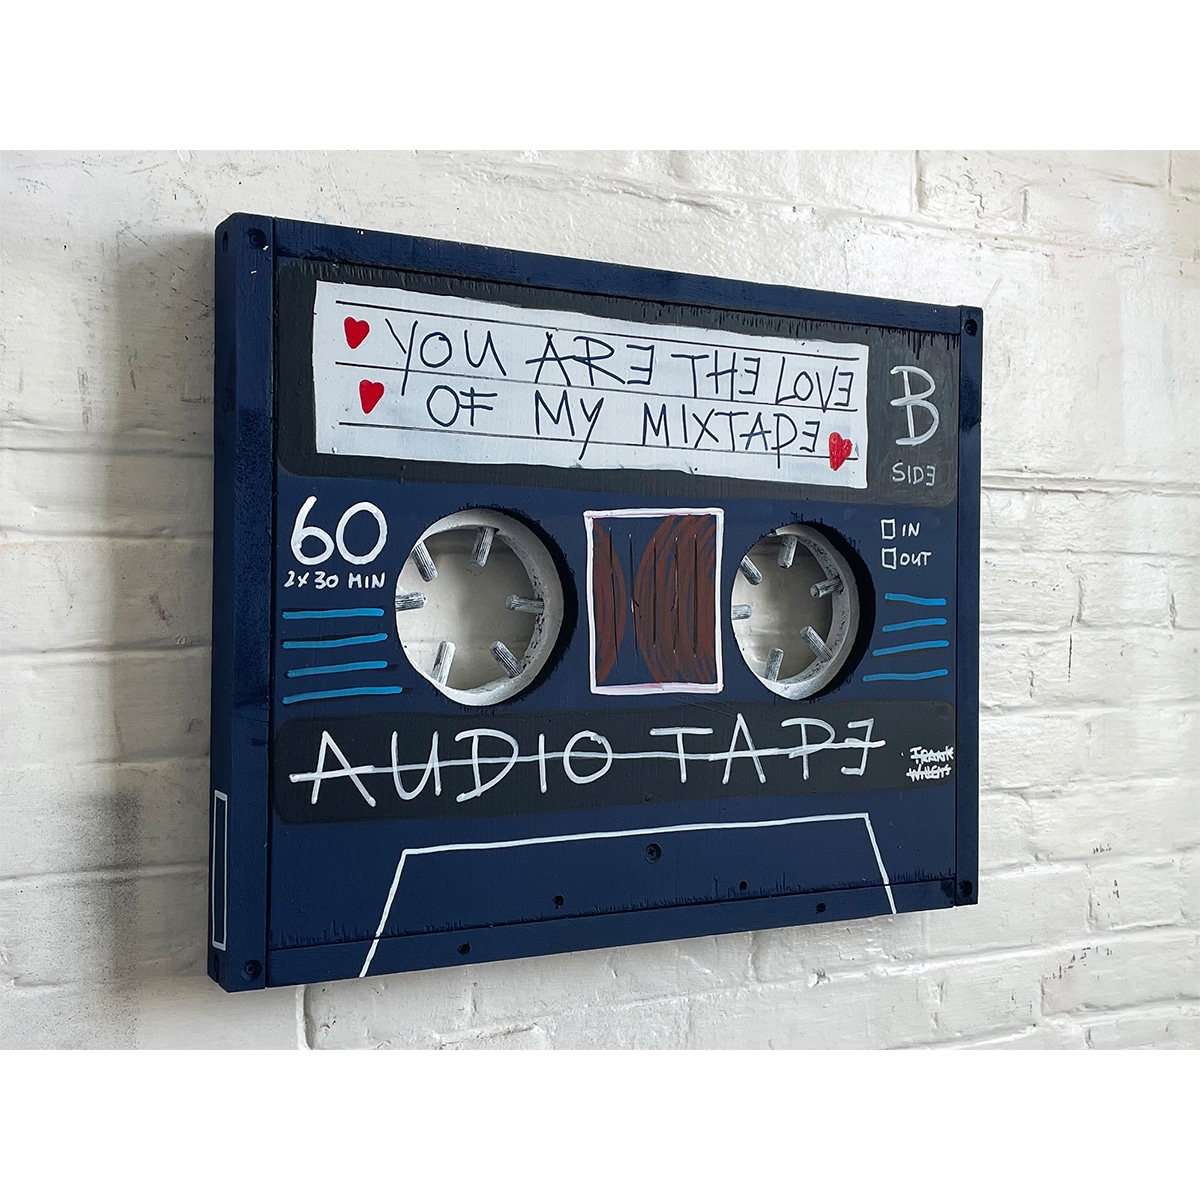 MIXTAPE - YOU ARE THE LOVE OF MY MIXTAPE